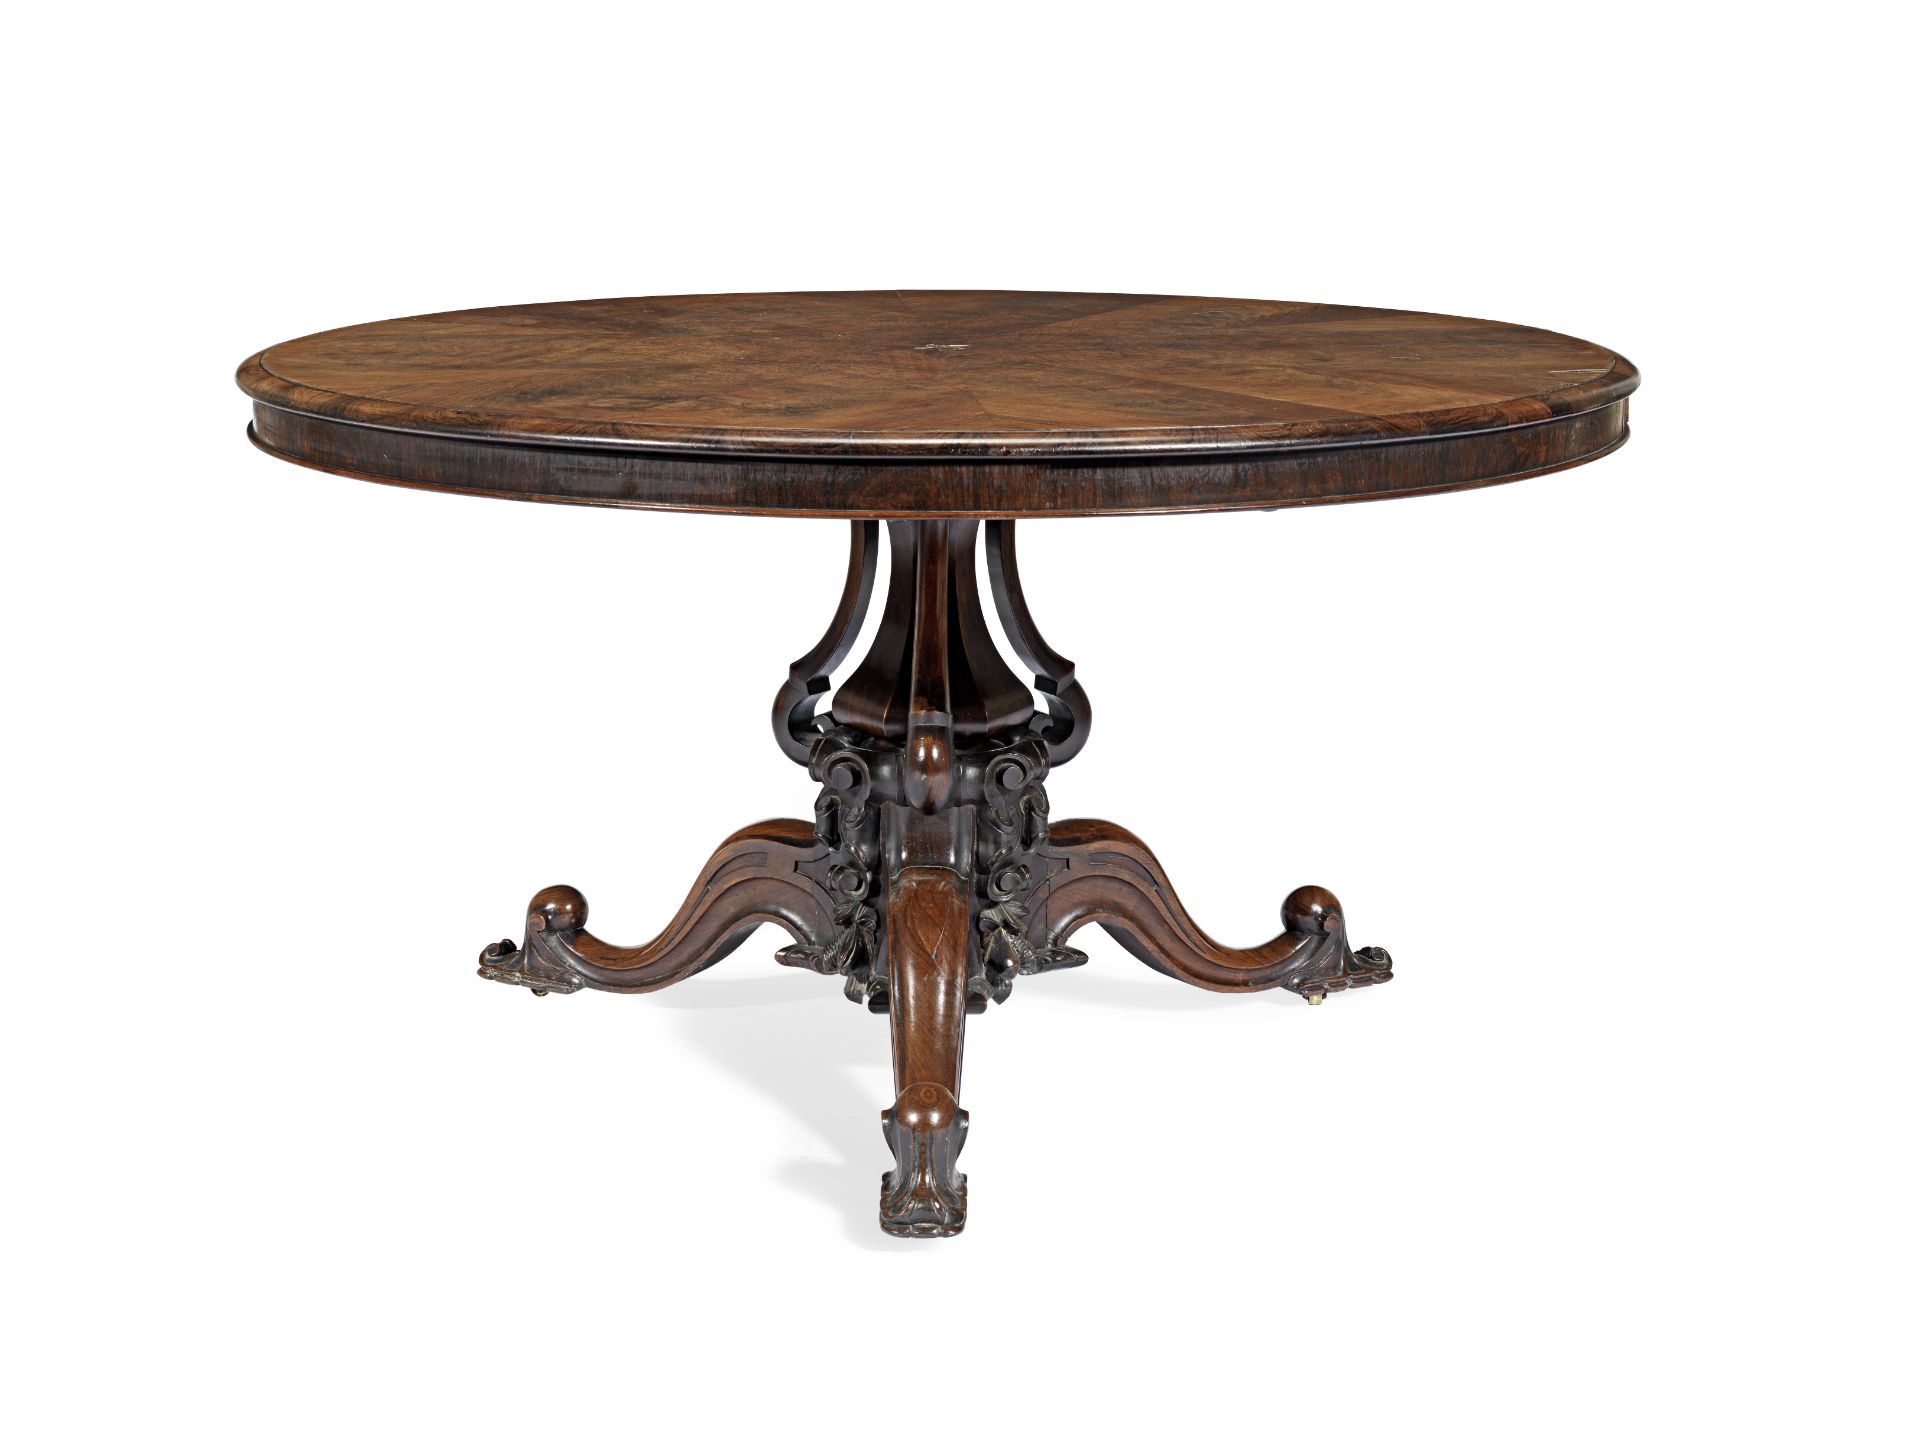 A large early Victorian Rococo revival carved rosewood breakfast table dated 1847